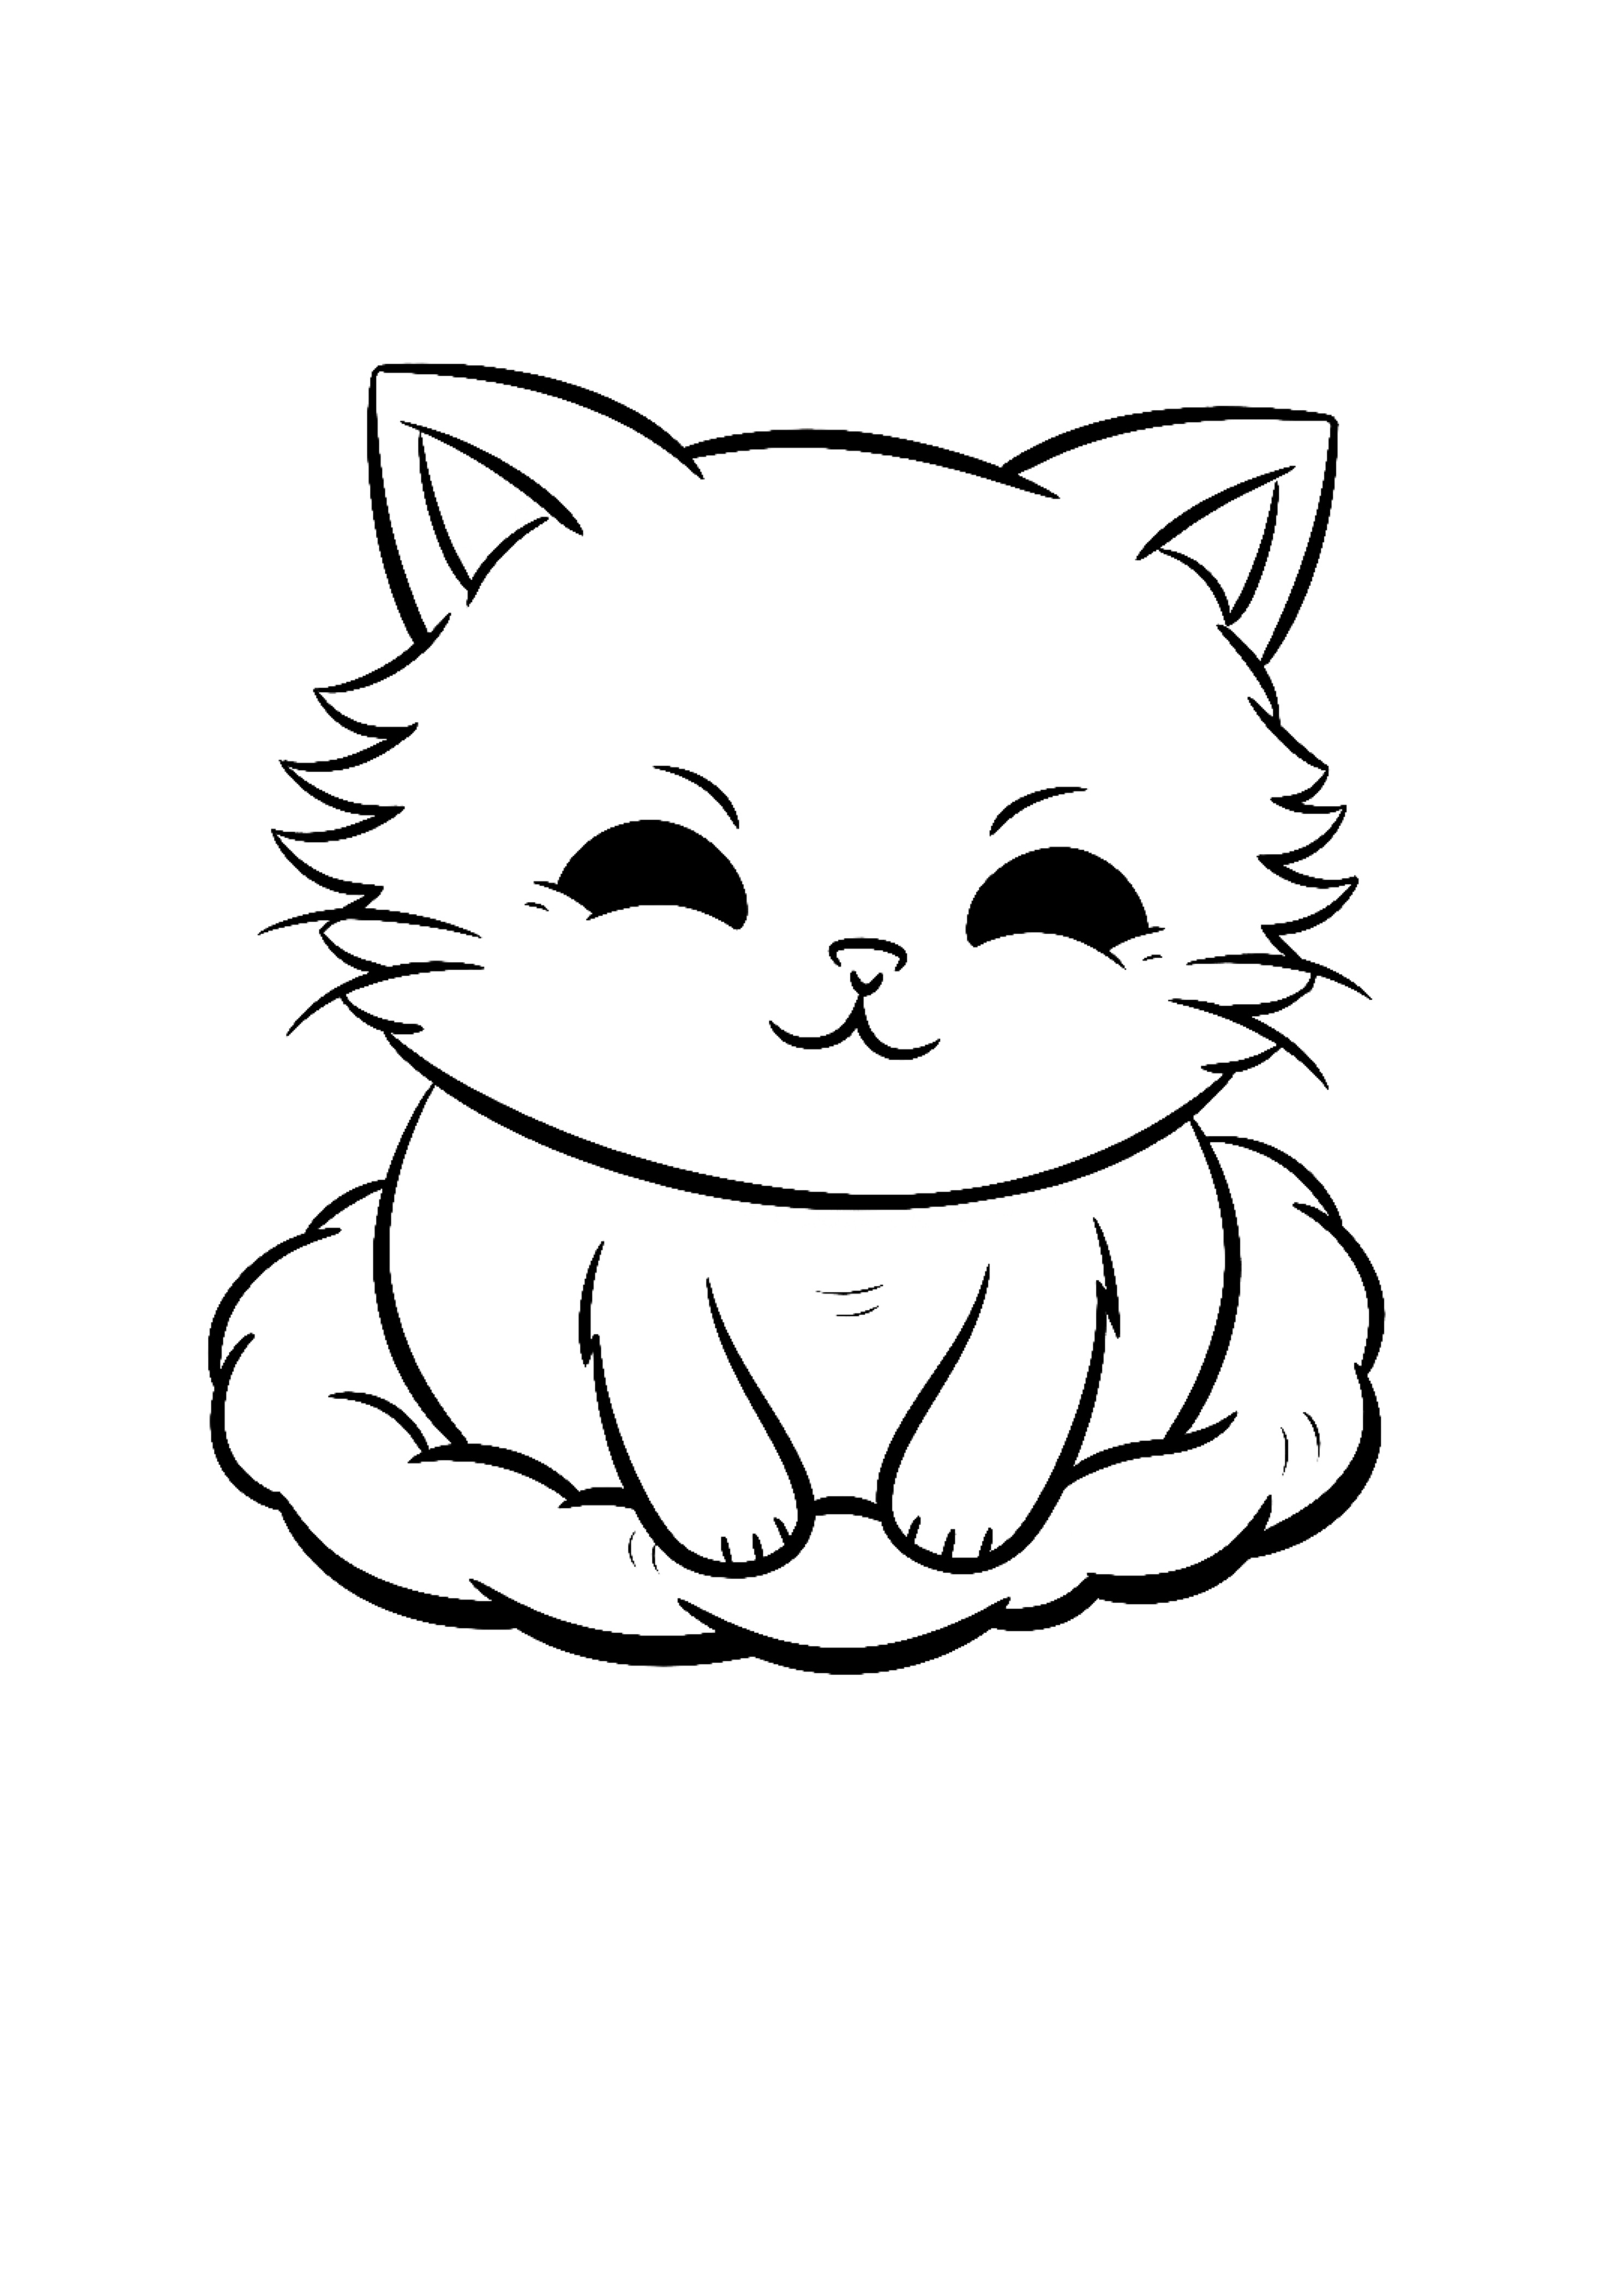 Kitten Coloring Pages for Kids.jpg